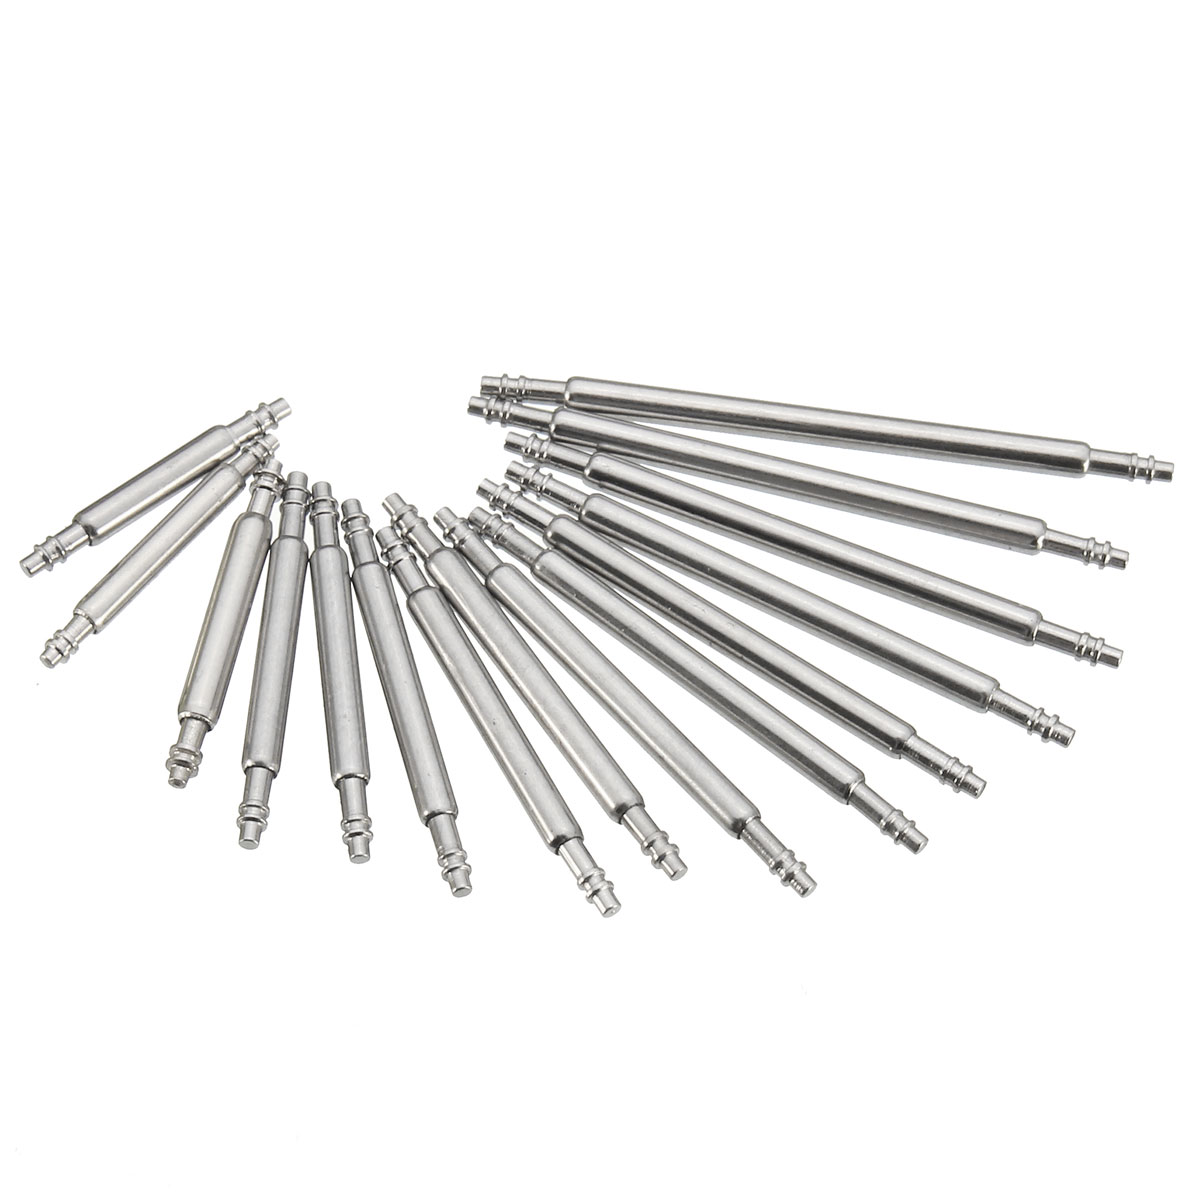 20Pcs-Stainless-Steel-Watch-Band-Spring-Bars-Strap-Link-Pins-10-23mm-Repair-Kit-1028537